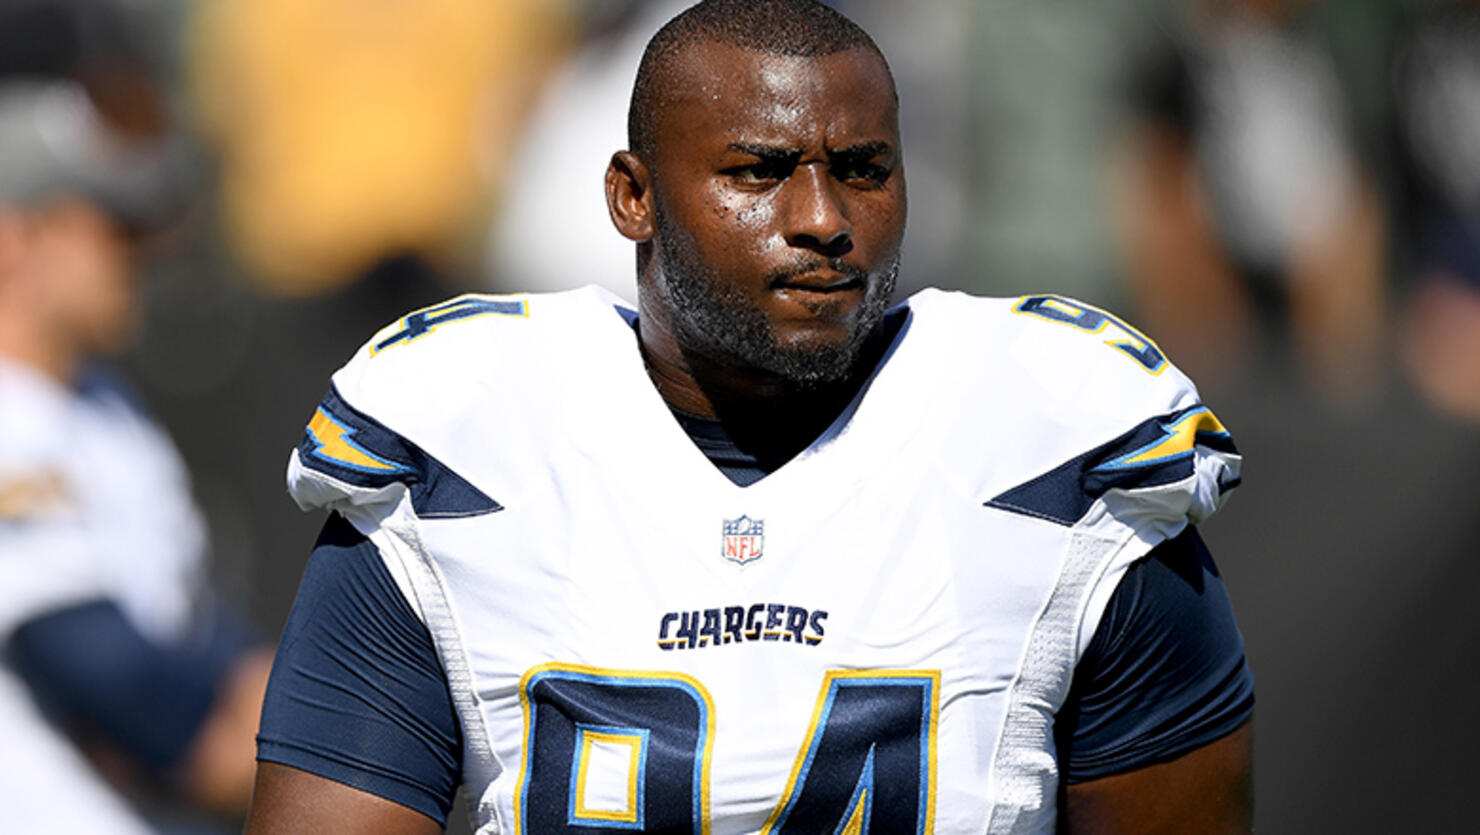 Corey Liuget #94 of the San Diego Chargers looks on during pregame warm ups prior to playing the Oakland Raiders